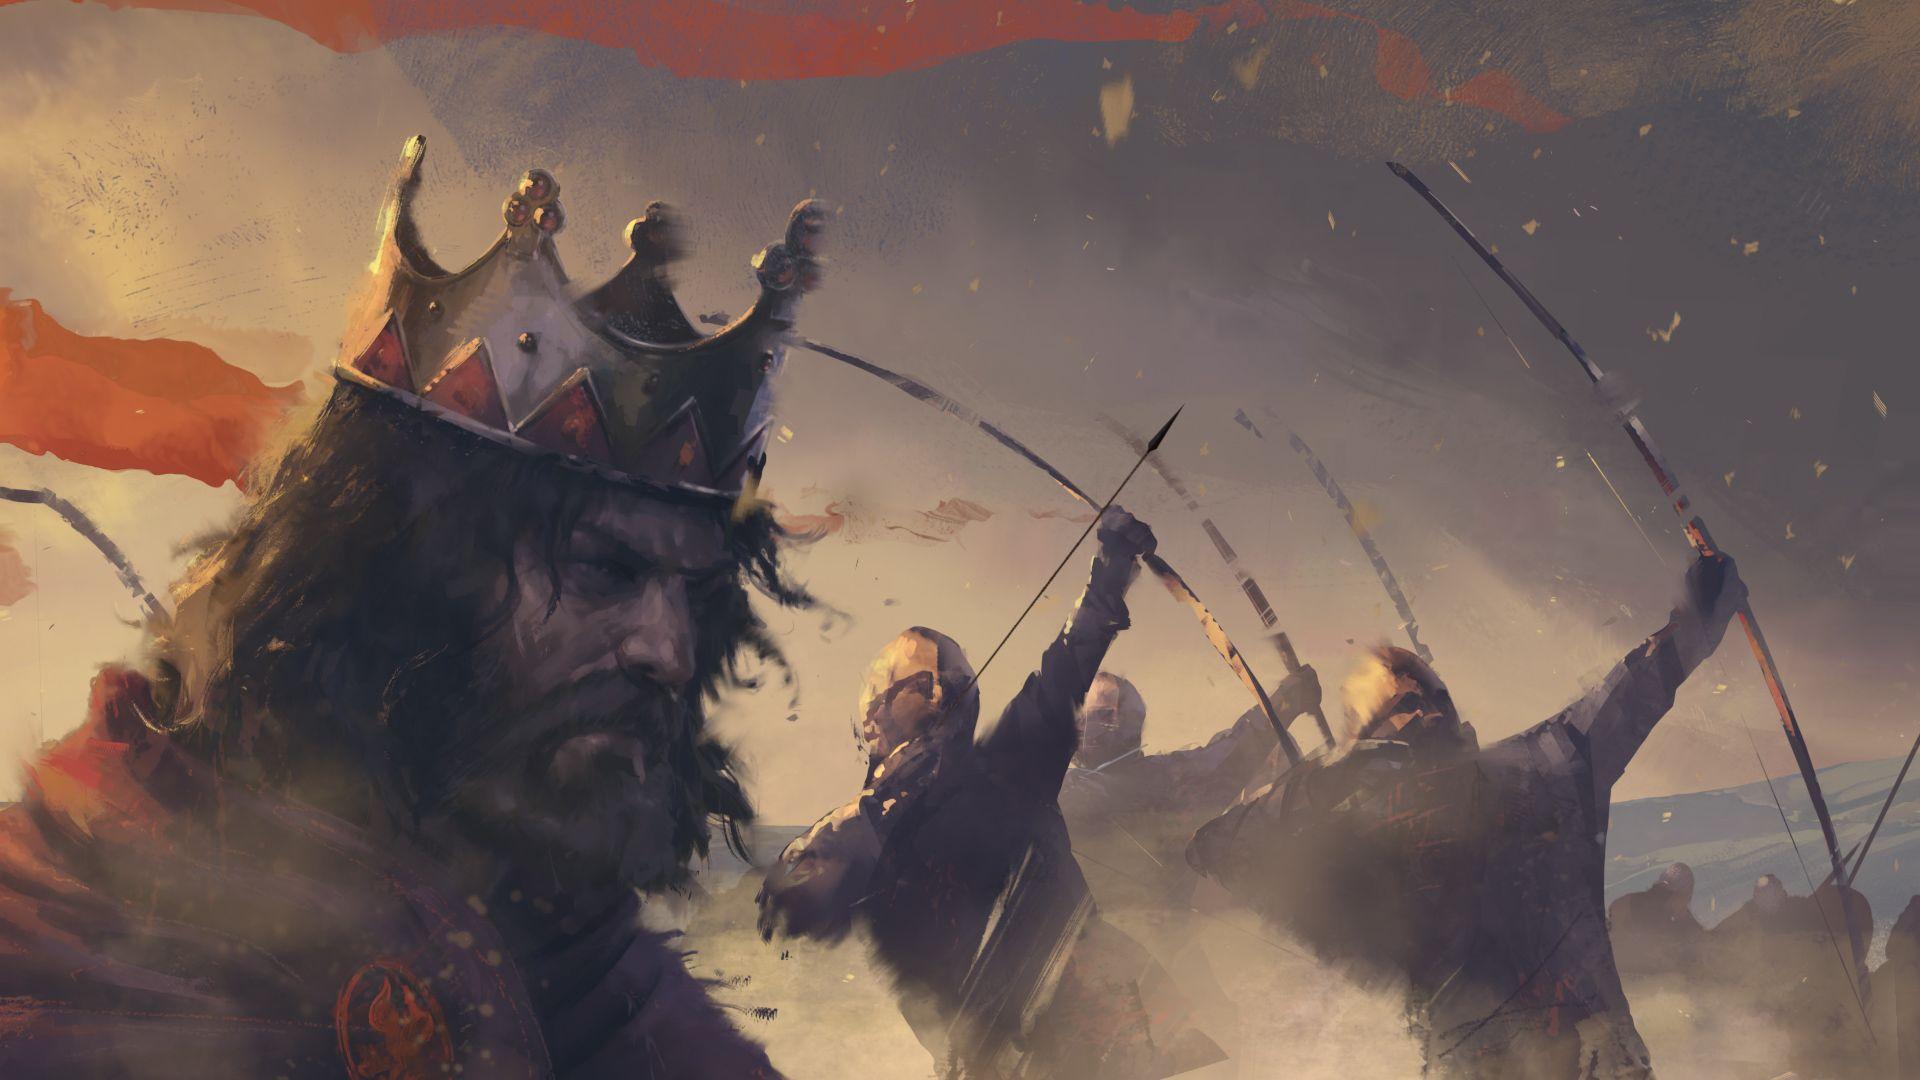 King and archers. Wallpaper from Total War: Three Kingdoms